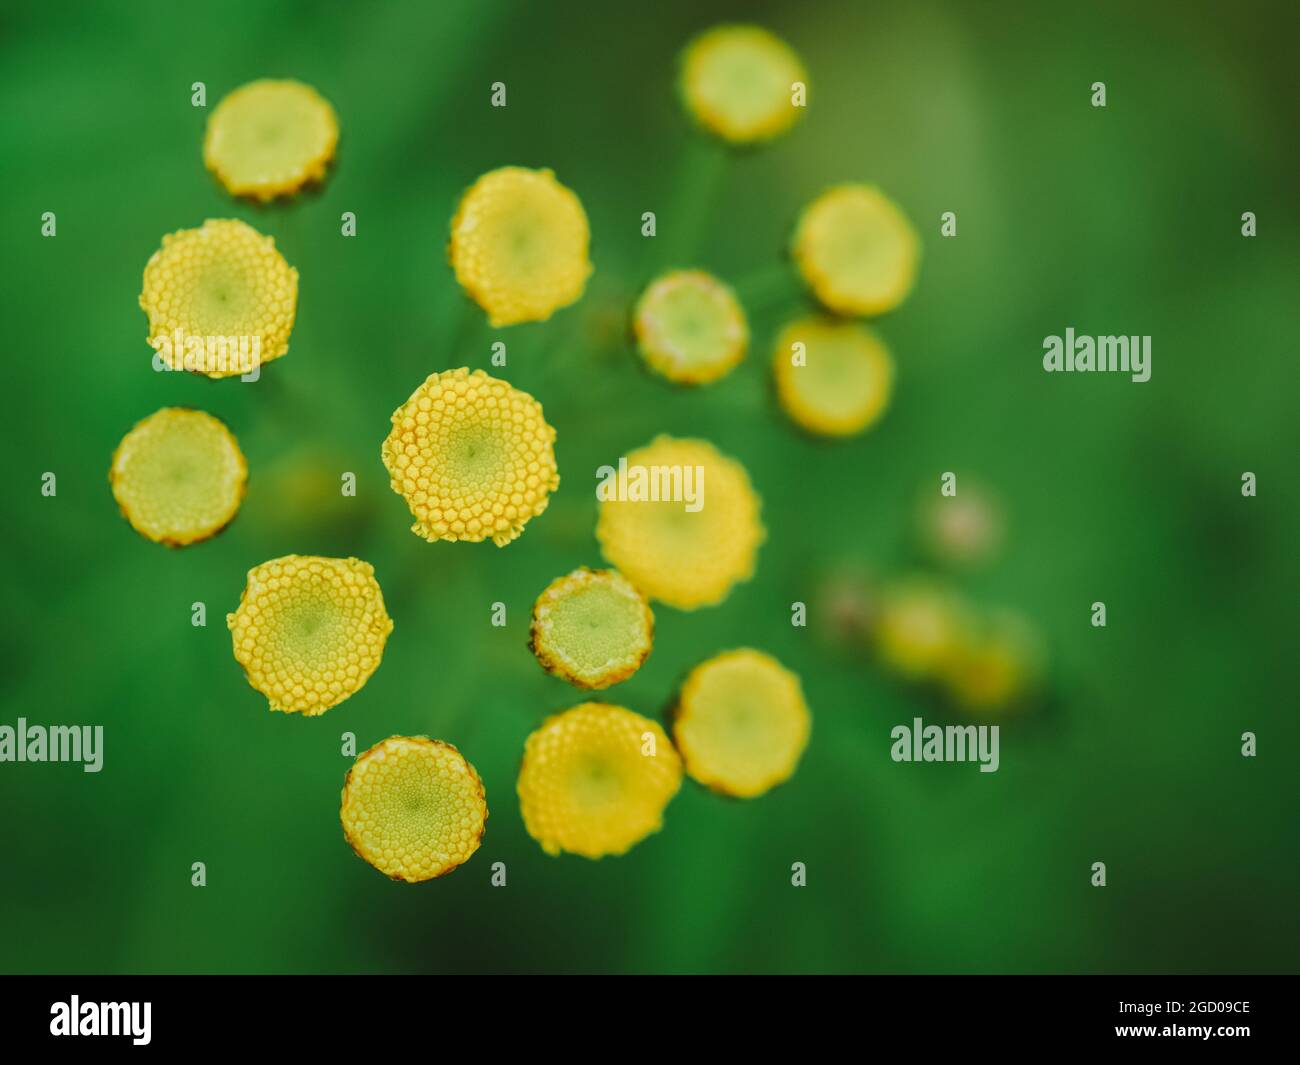 Yellow flower core stamens and pistils without petals on green background, abstract natural horizontal photo Stock Photo